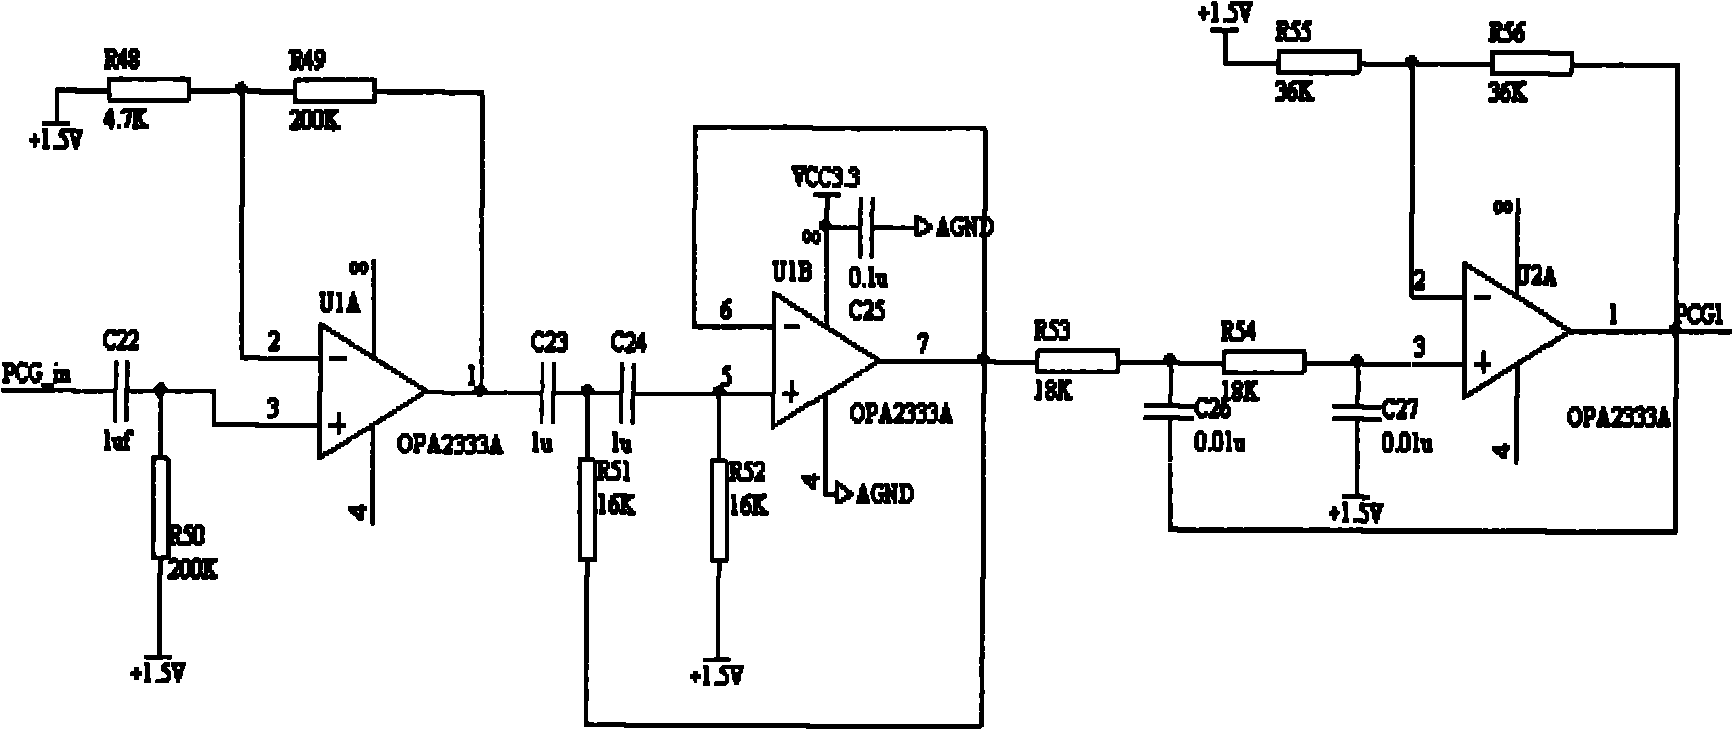 Classification and identification method and device for cardiechema signals